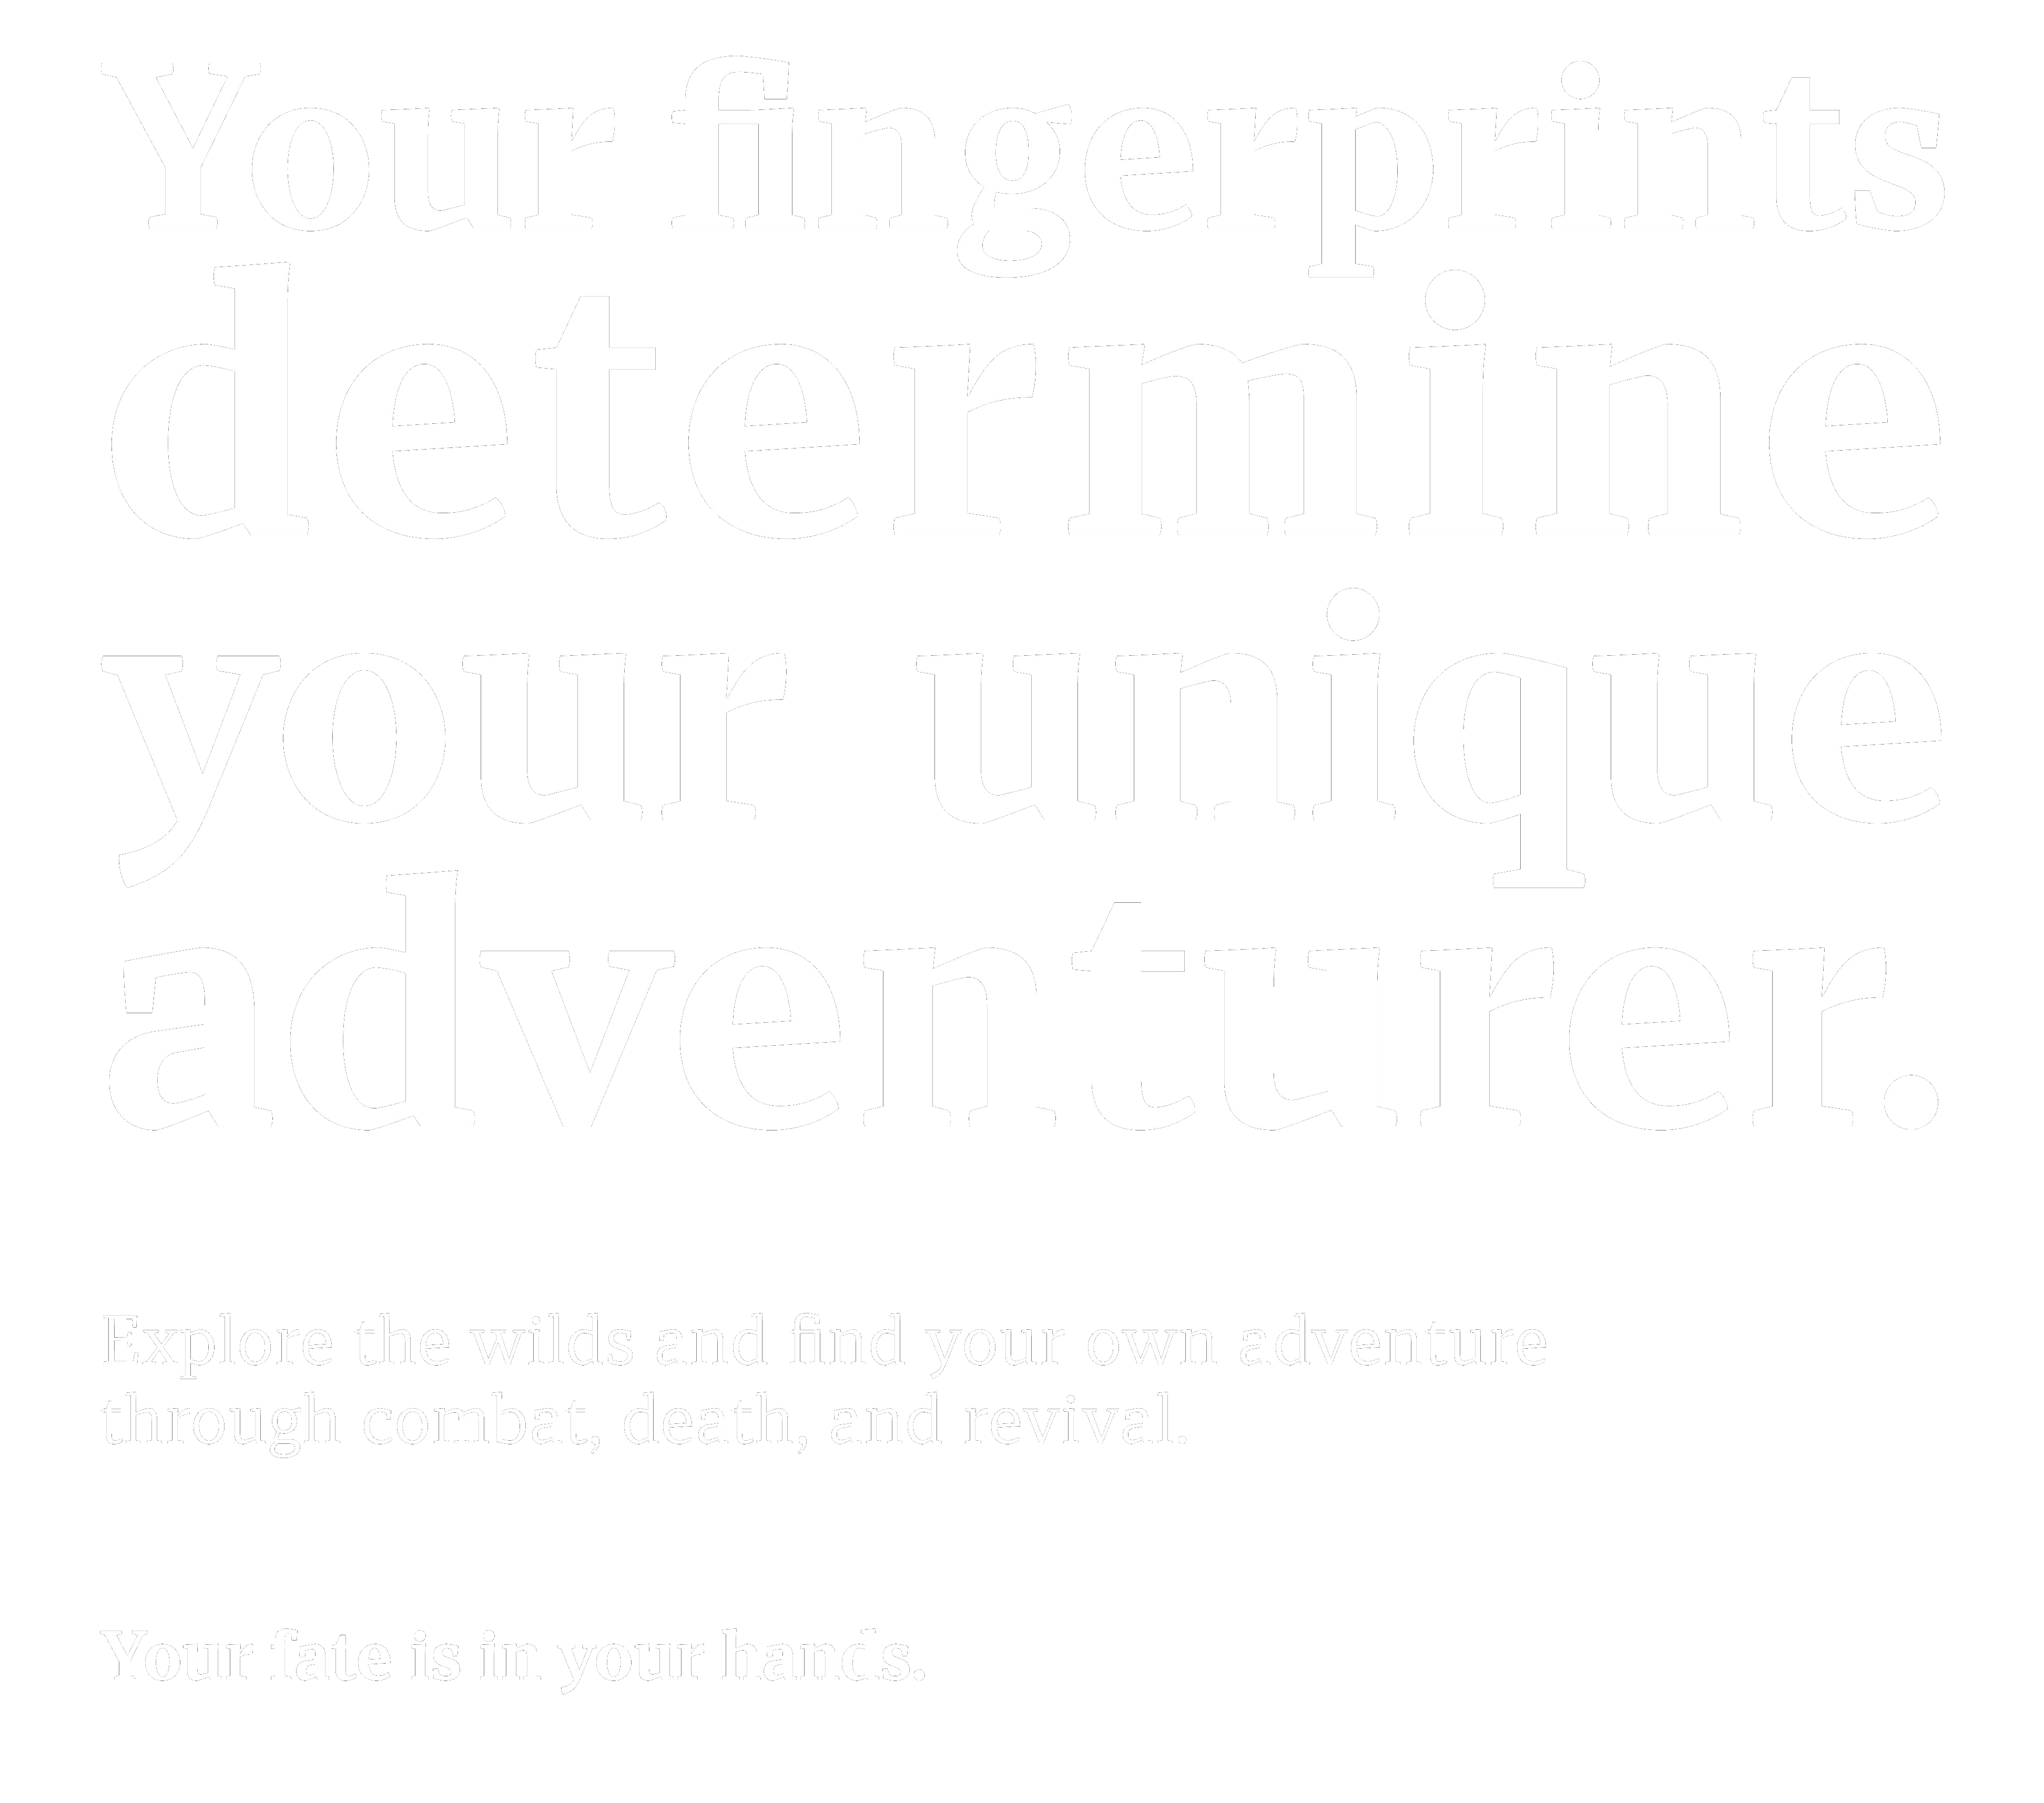 Your fingerprints determine your unique adventurer. Explore the wilds and find your own adventure through combat, death, and revival. Your fate is in your hands.